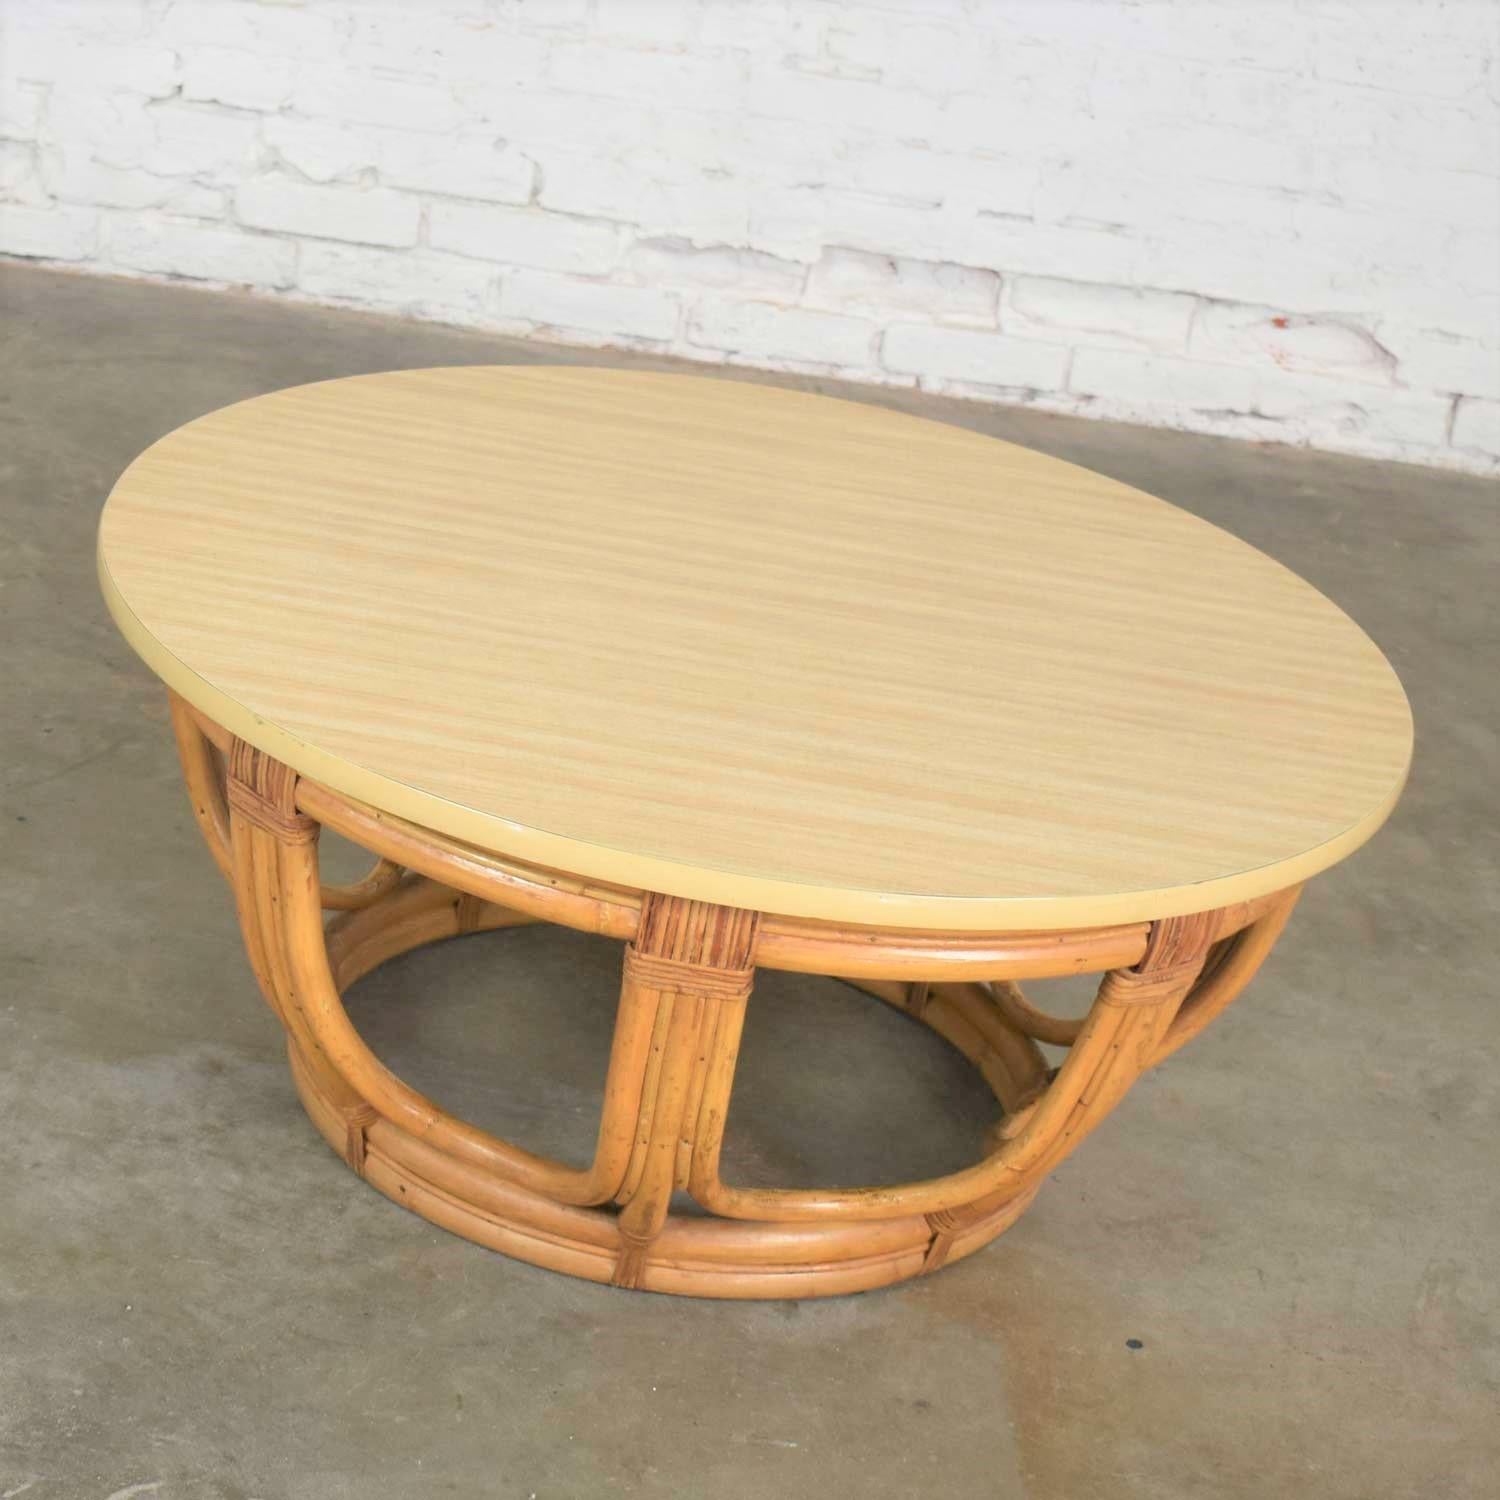 Handsome round rattan drum shape coffee table or end table with laminate top. It is in wonderful vintage condition with no outstanding flaws only normal wear for age. Laminate top may be a replacement top at some point in its life but looks